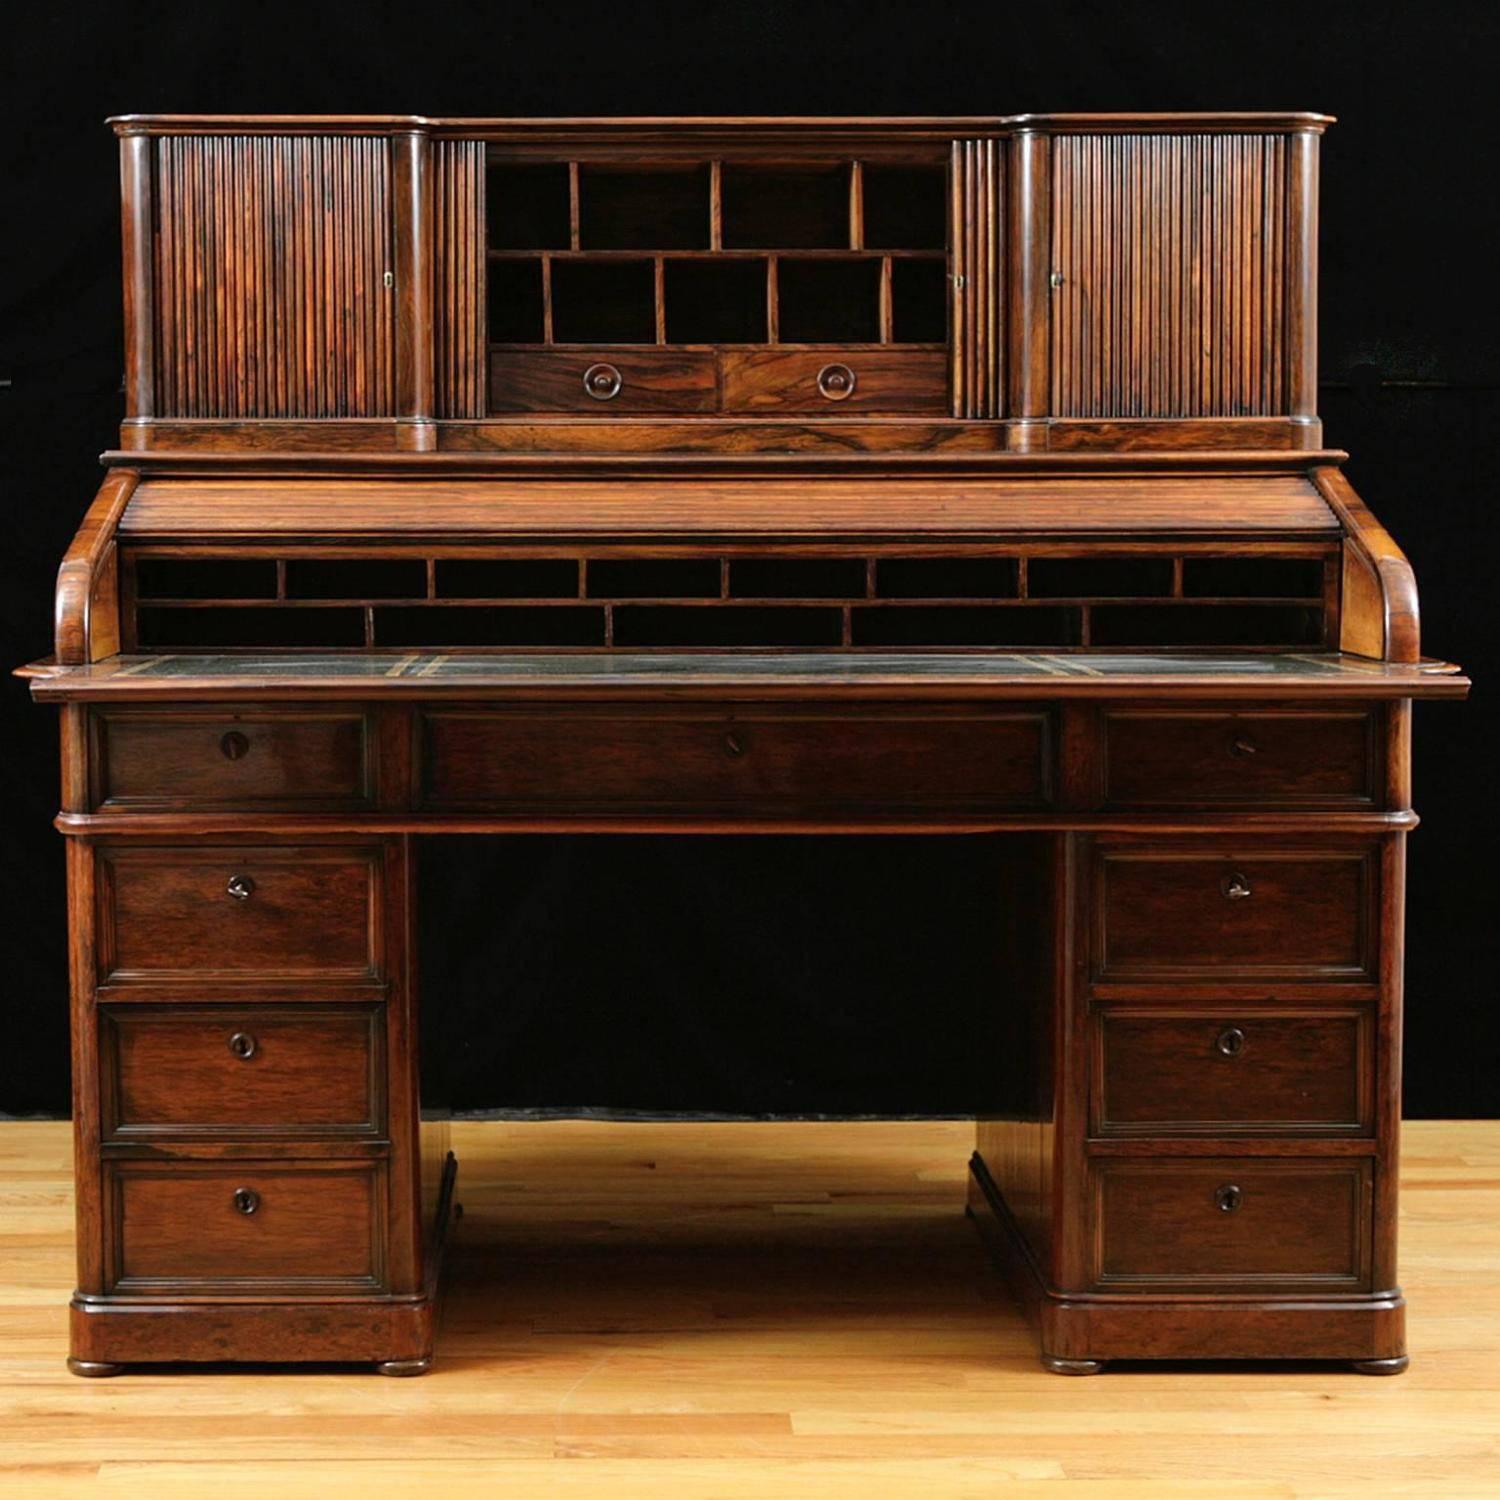 Museum quality Napoleon III pedestal base with tambour roll-top desk in rosewood, France, circa 1860. Desk is finished on both sides and can float in a space or be placed against a wall. Cabinet doors on back side (see image.) Desk has new leather